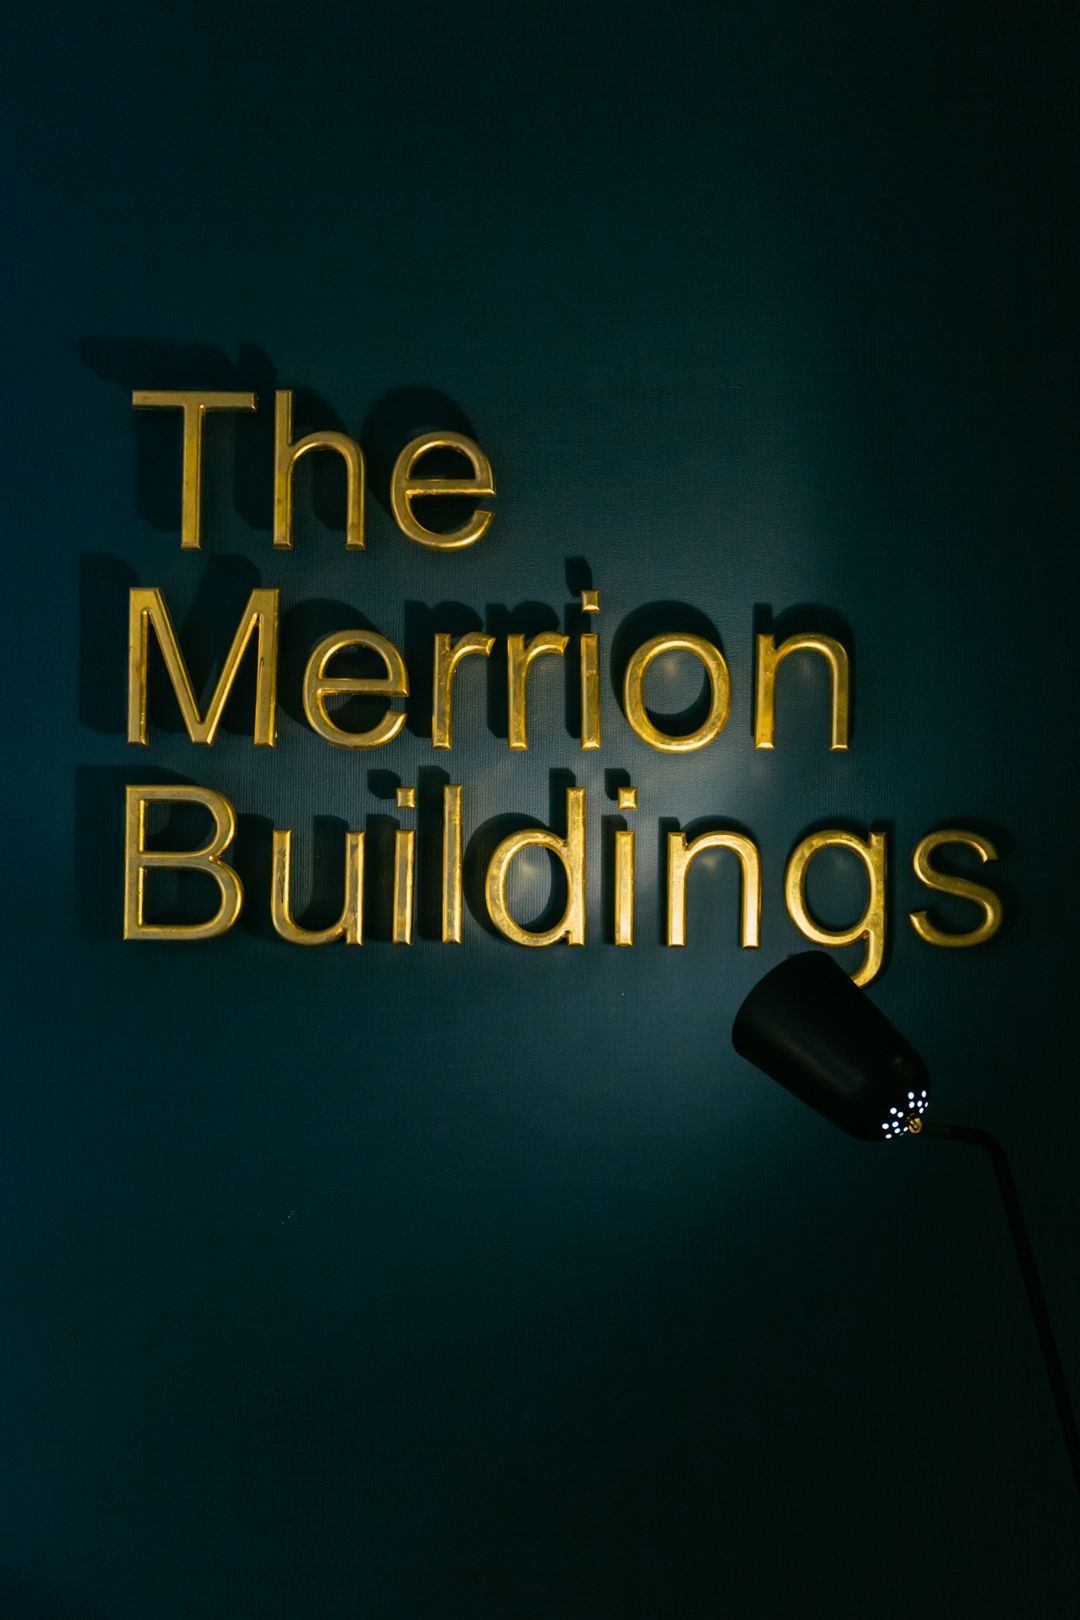 The Merrion Buildings, Iconic Offices